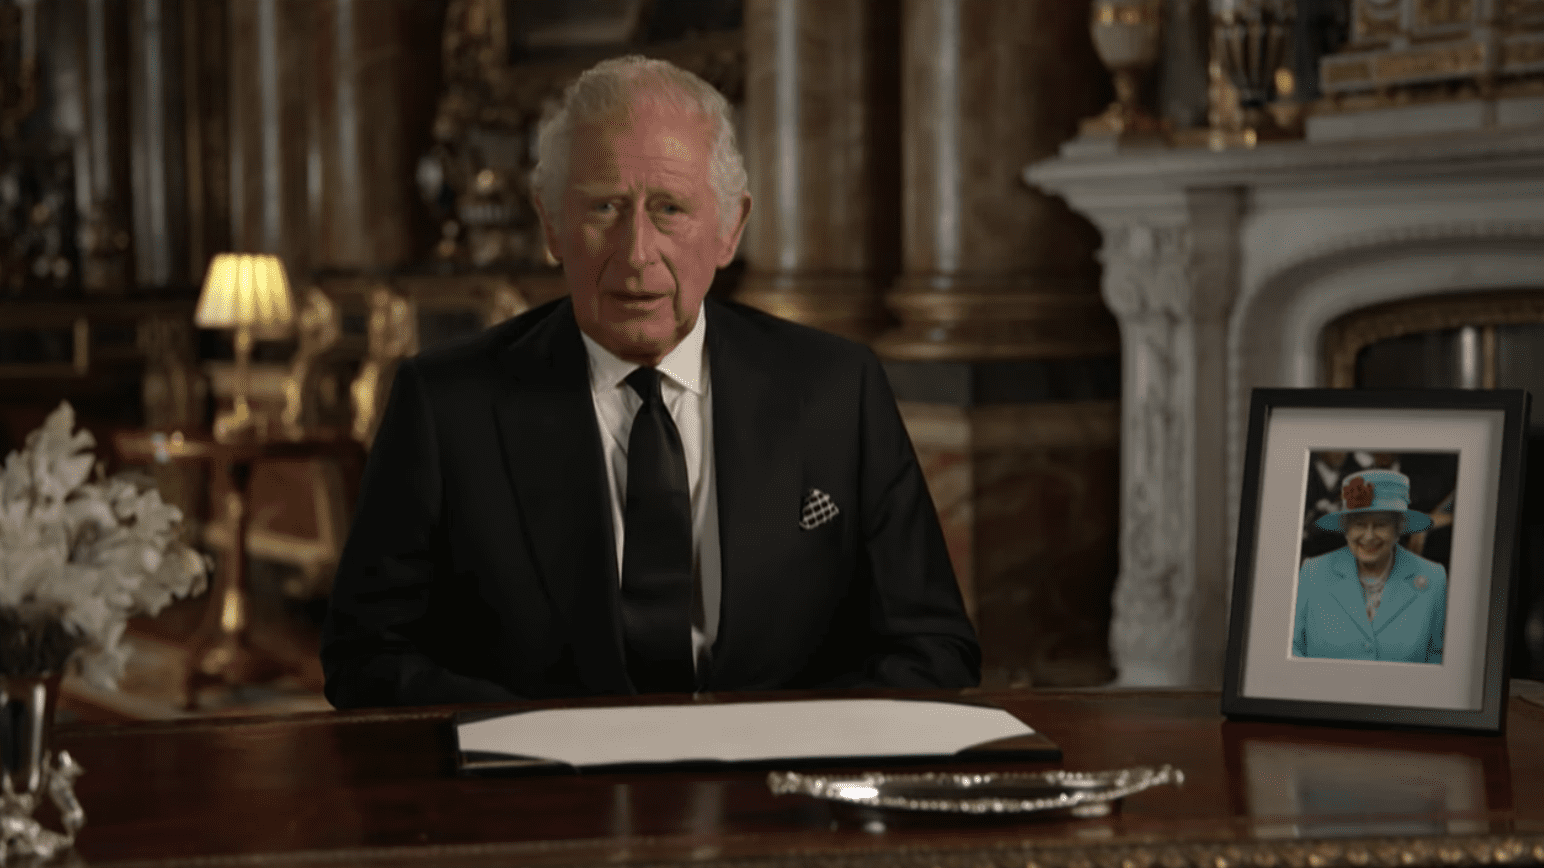 His Majesty pays tribute to his mother and thanks the public for their condolences and support following the death of The Queen and his accession to the Throne.